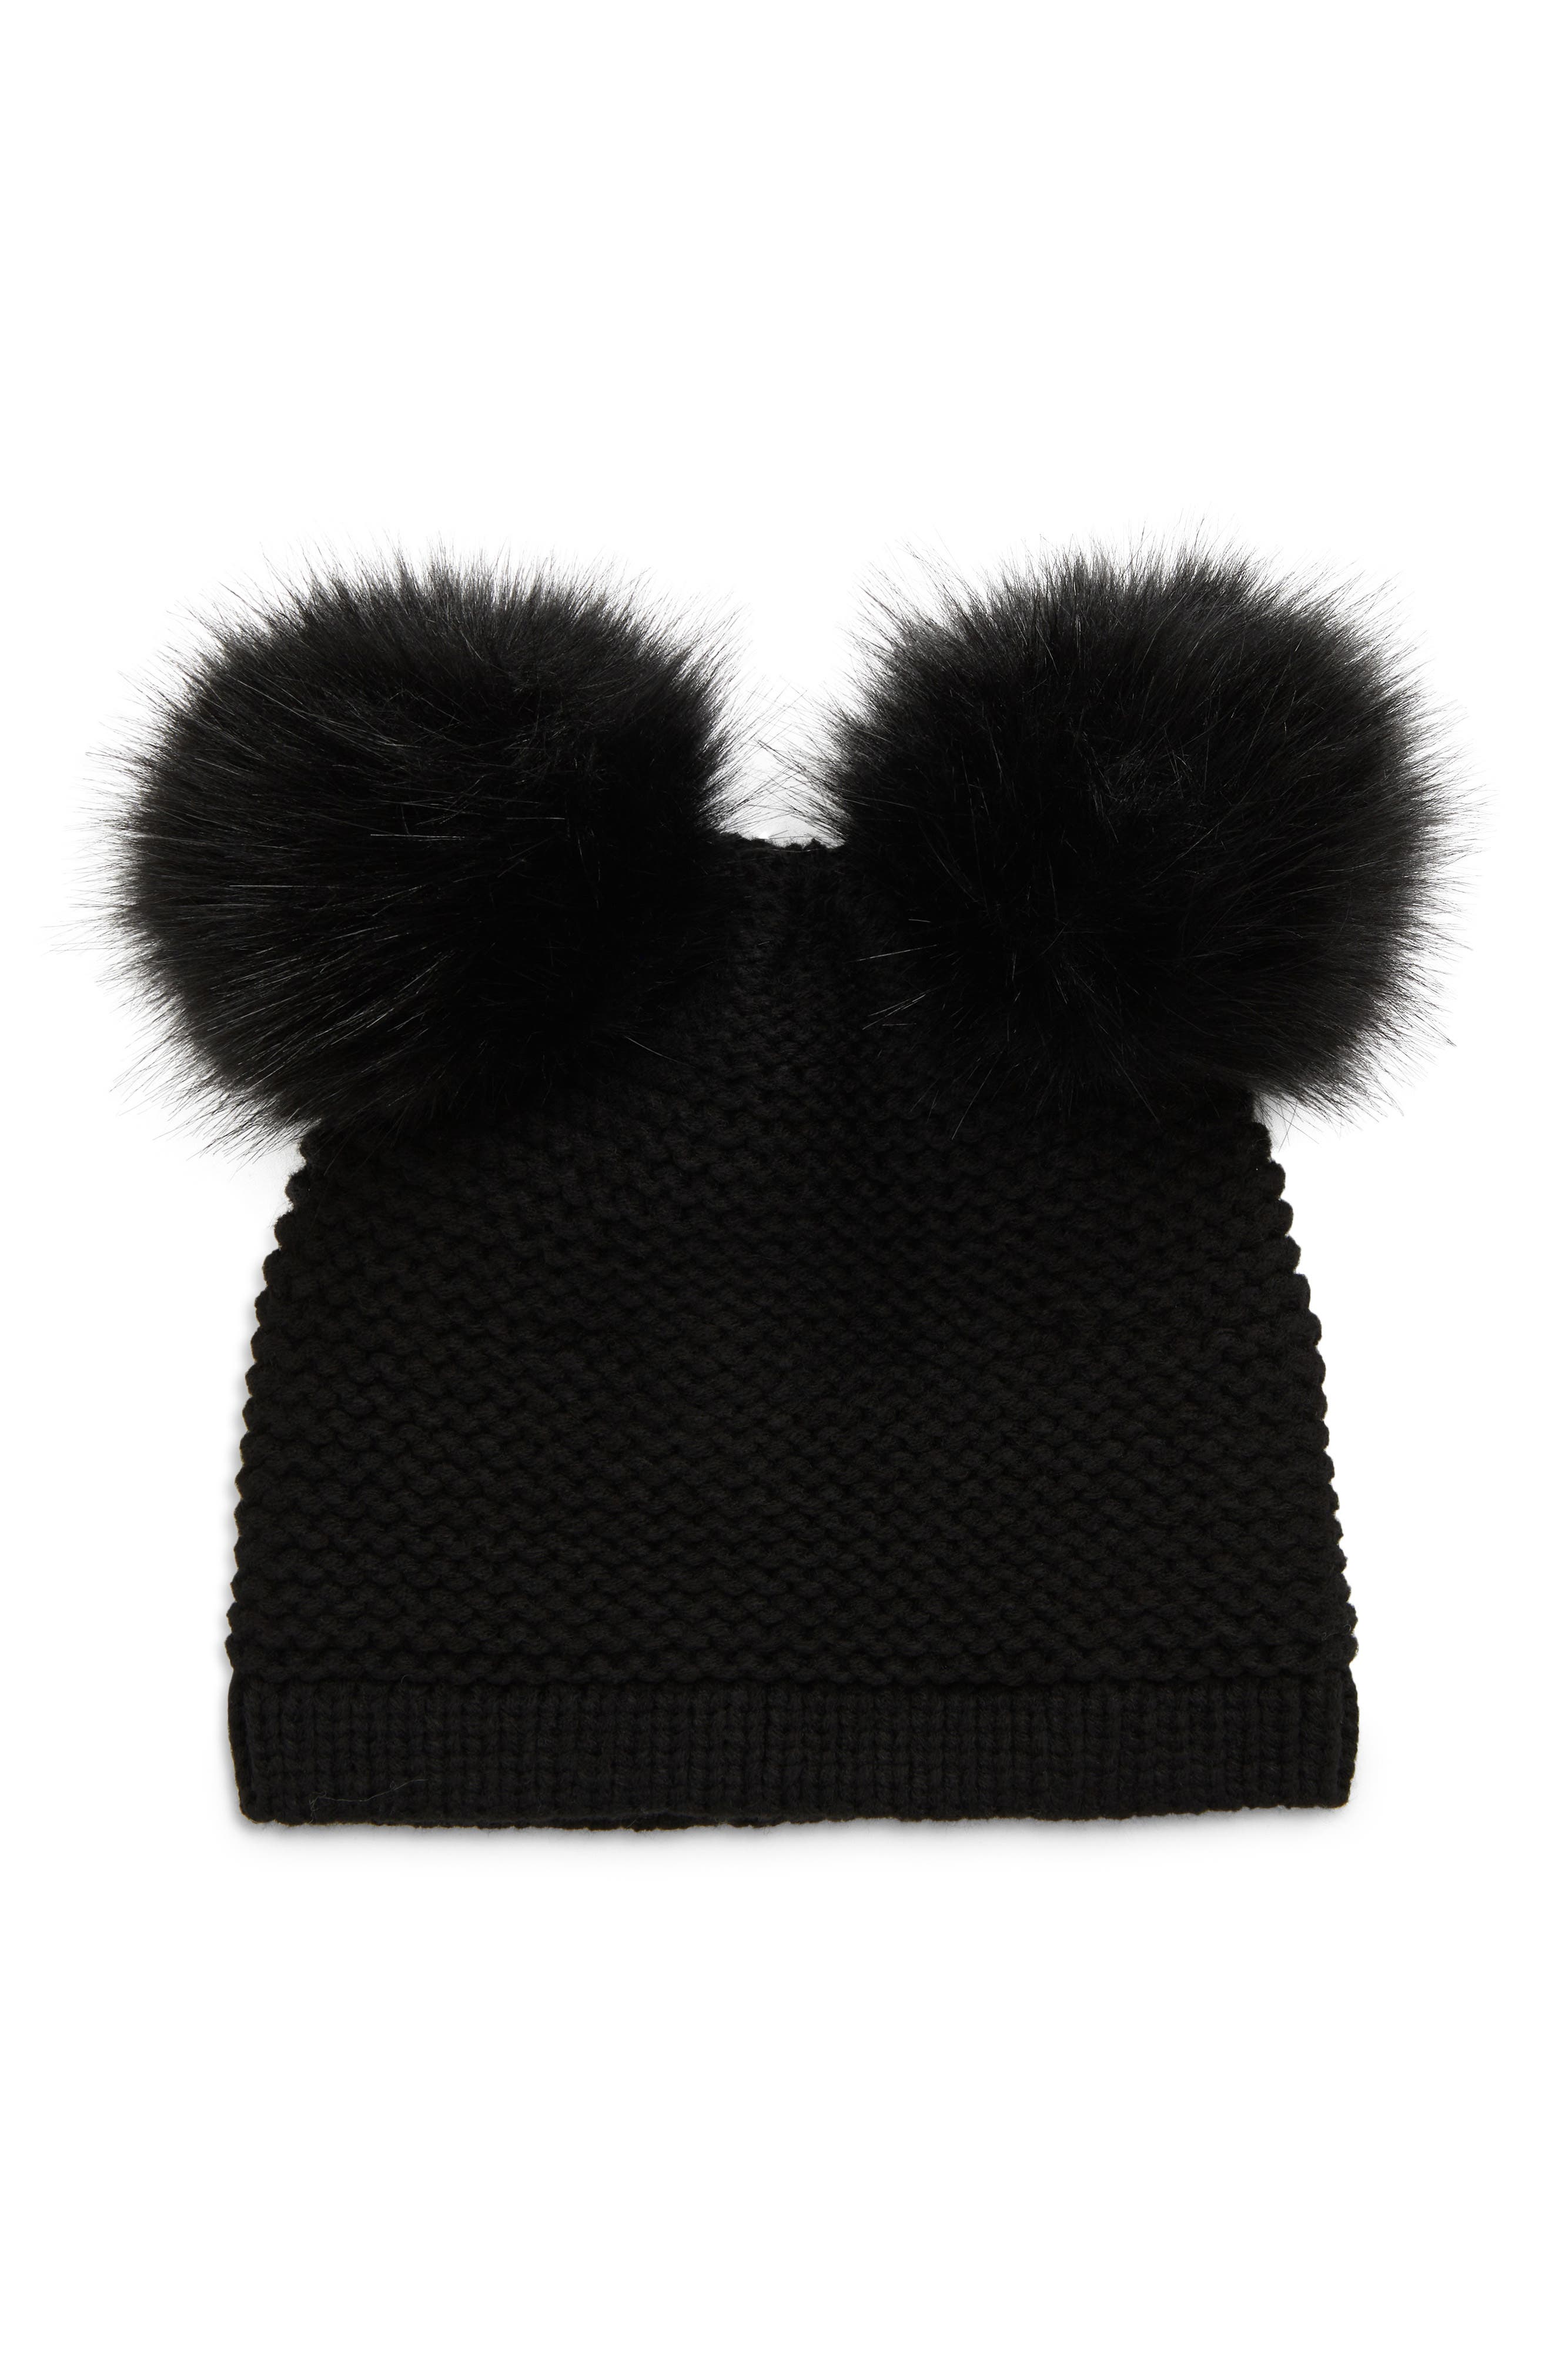 Kyi Kyi Chunky Wool Blend Beanie with Faux Fur Poms in Black/Black at Nordstrom